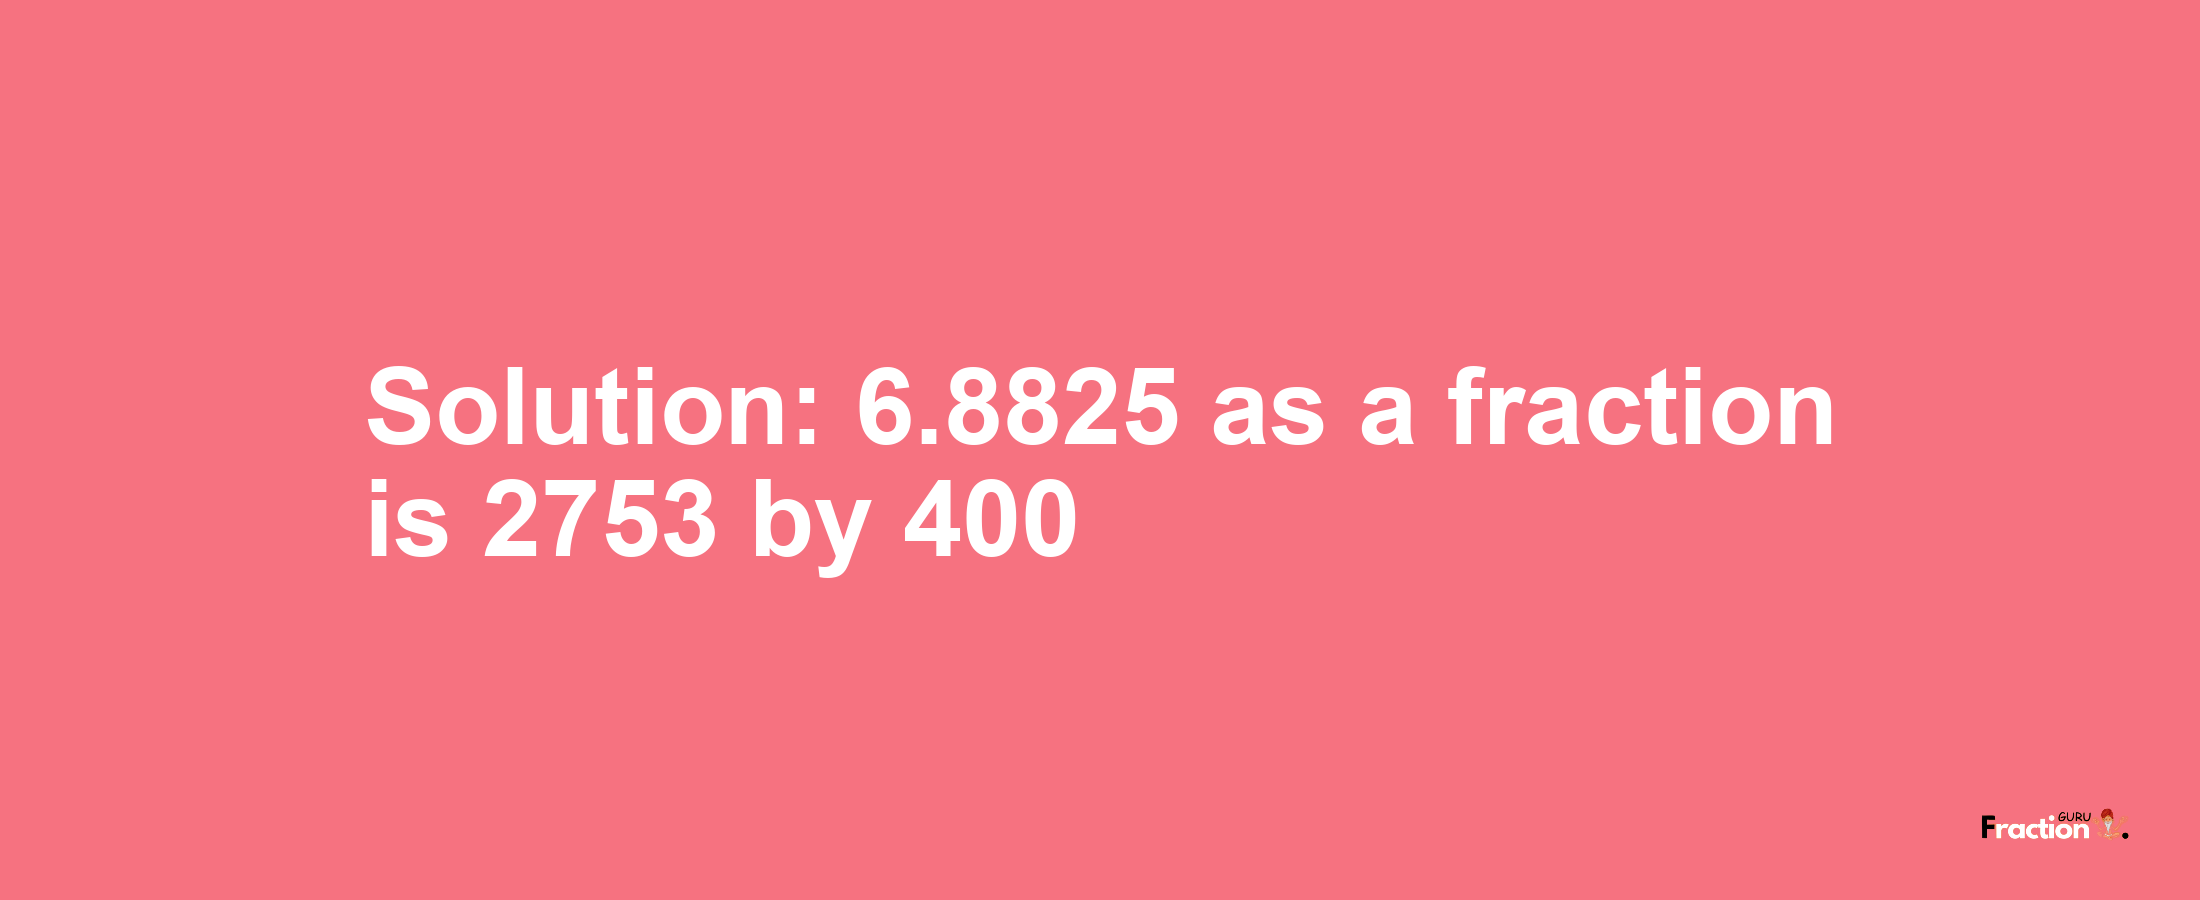 Solution:6.8825 as a fraction is 2753/400